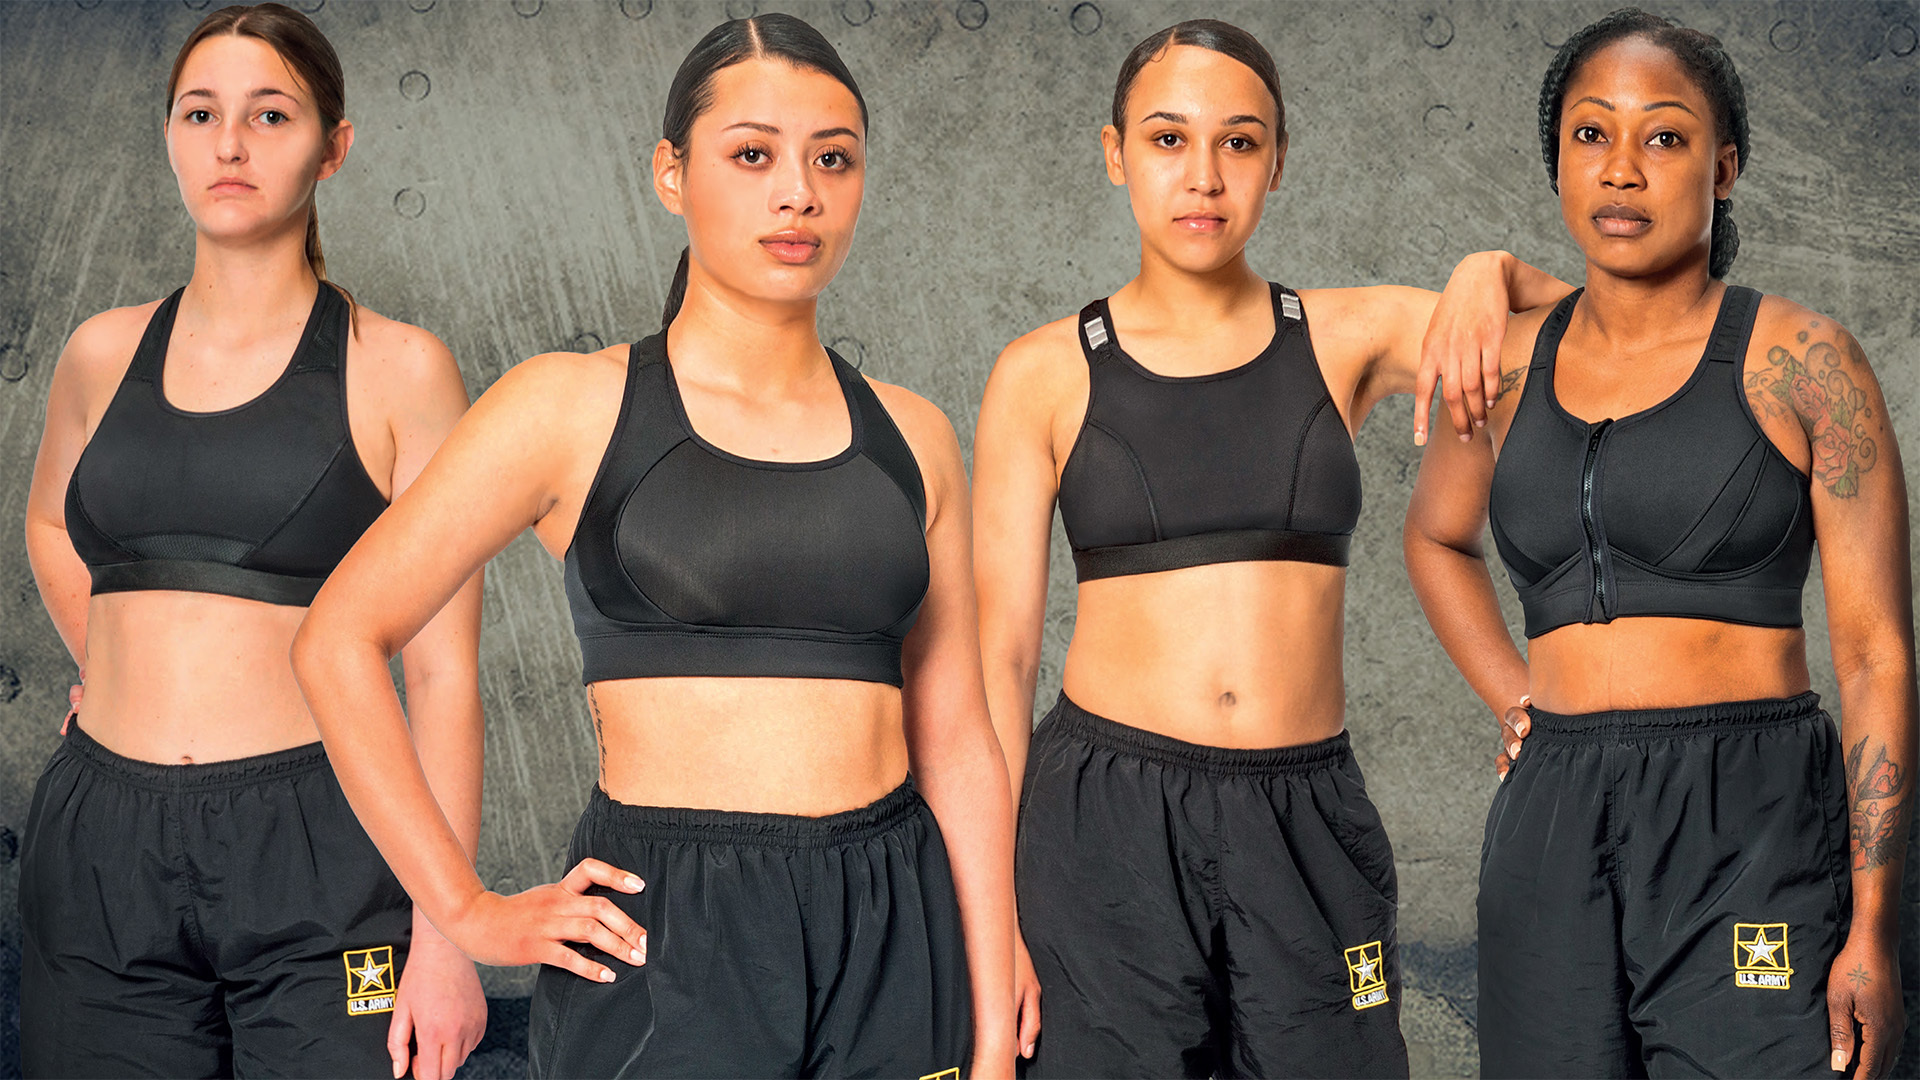 The New Yorker makes a joke of the Army's tactical bra. It's not